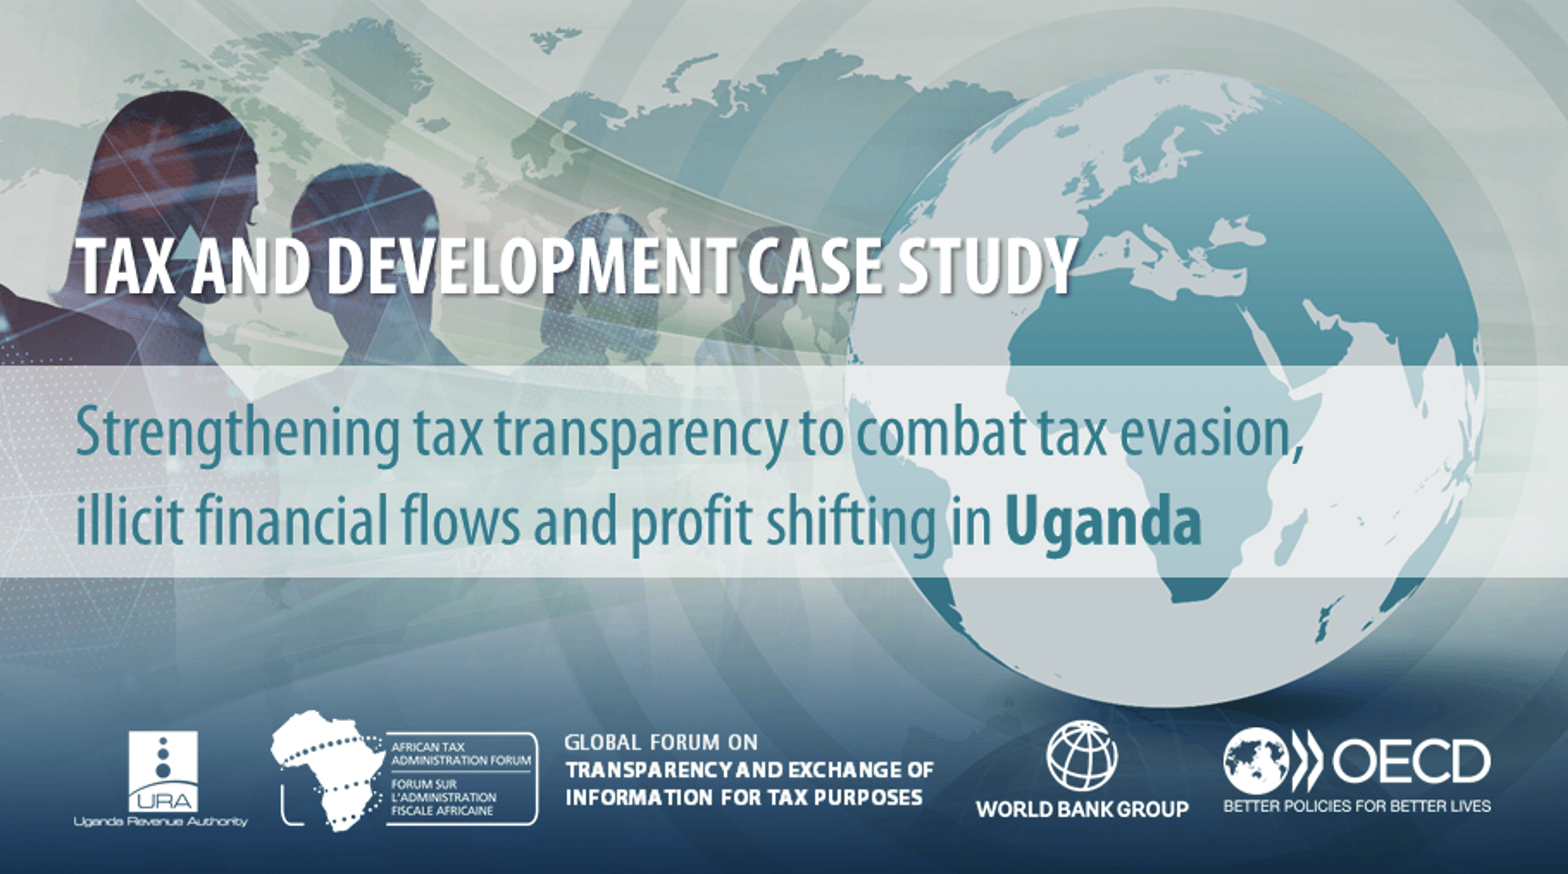 Revenue mobilisation through tax transparency: Lessons from Uganda’s transformative journey